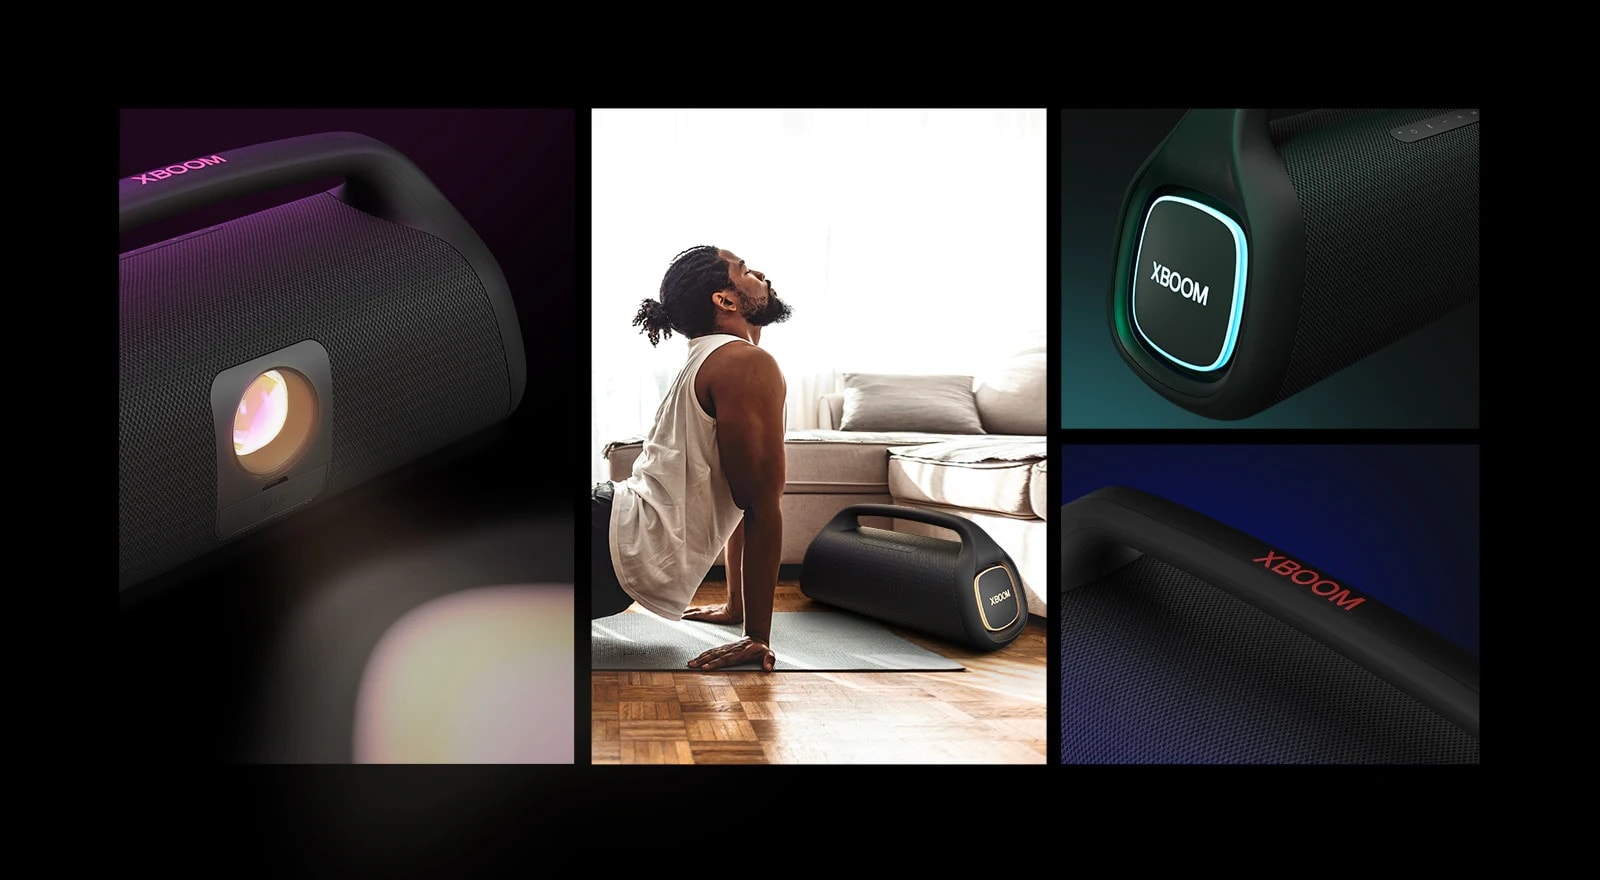 College. From left, close up view of LG XBOOM Go XG9. Next, an image of a man doing yoga. On the right from top to bottom: close-up view of the speaker with pink lighting and two glasses of drink.